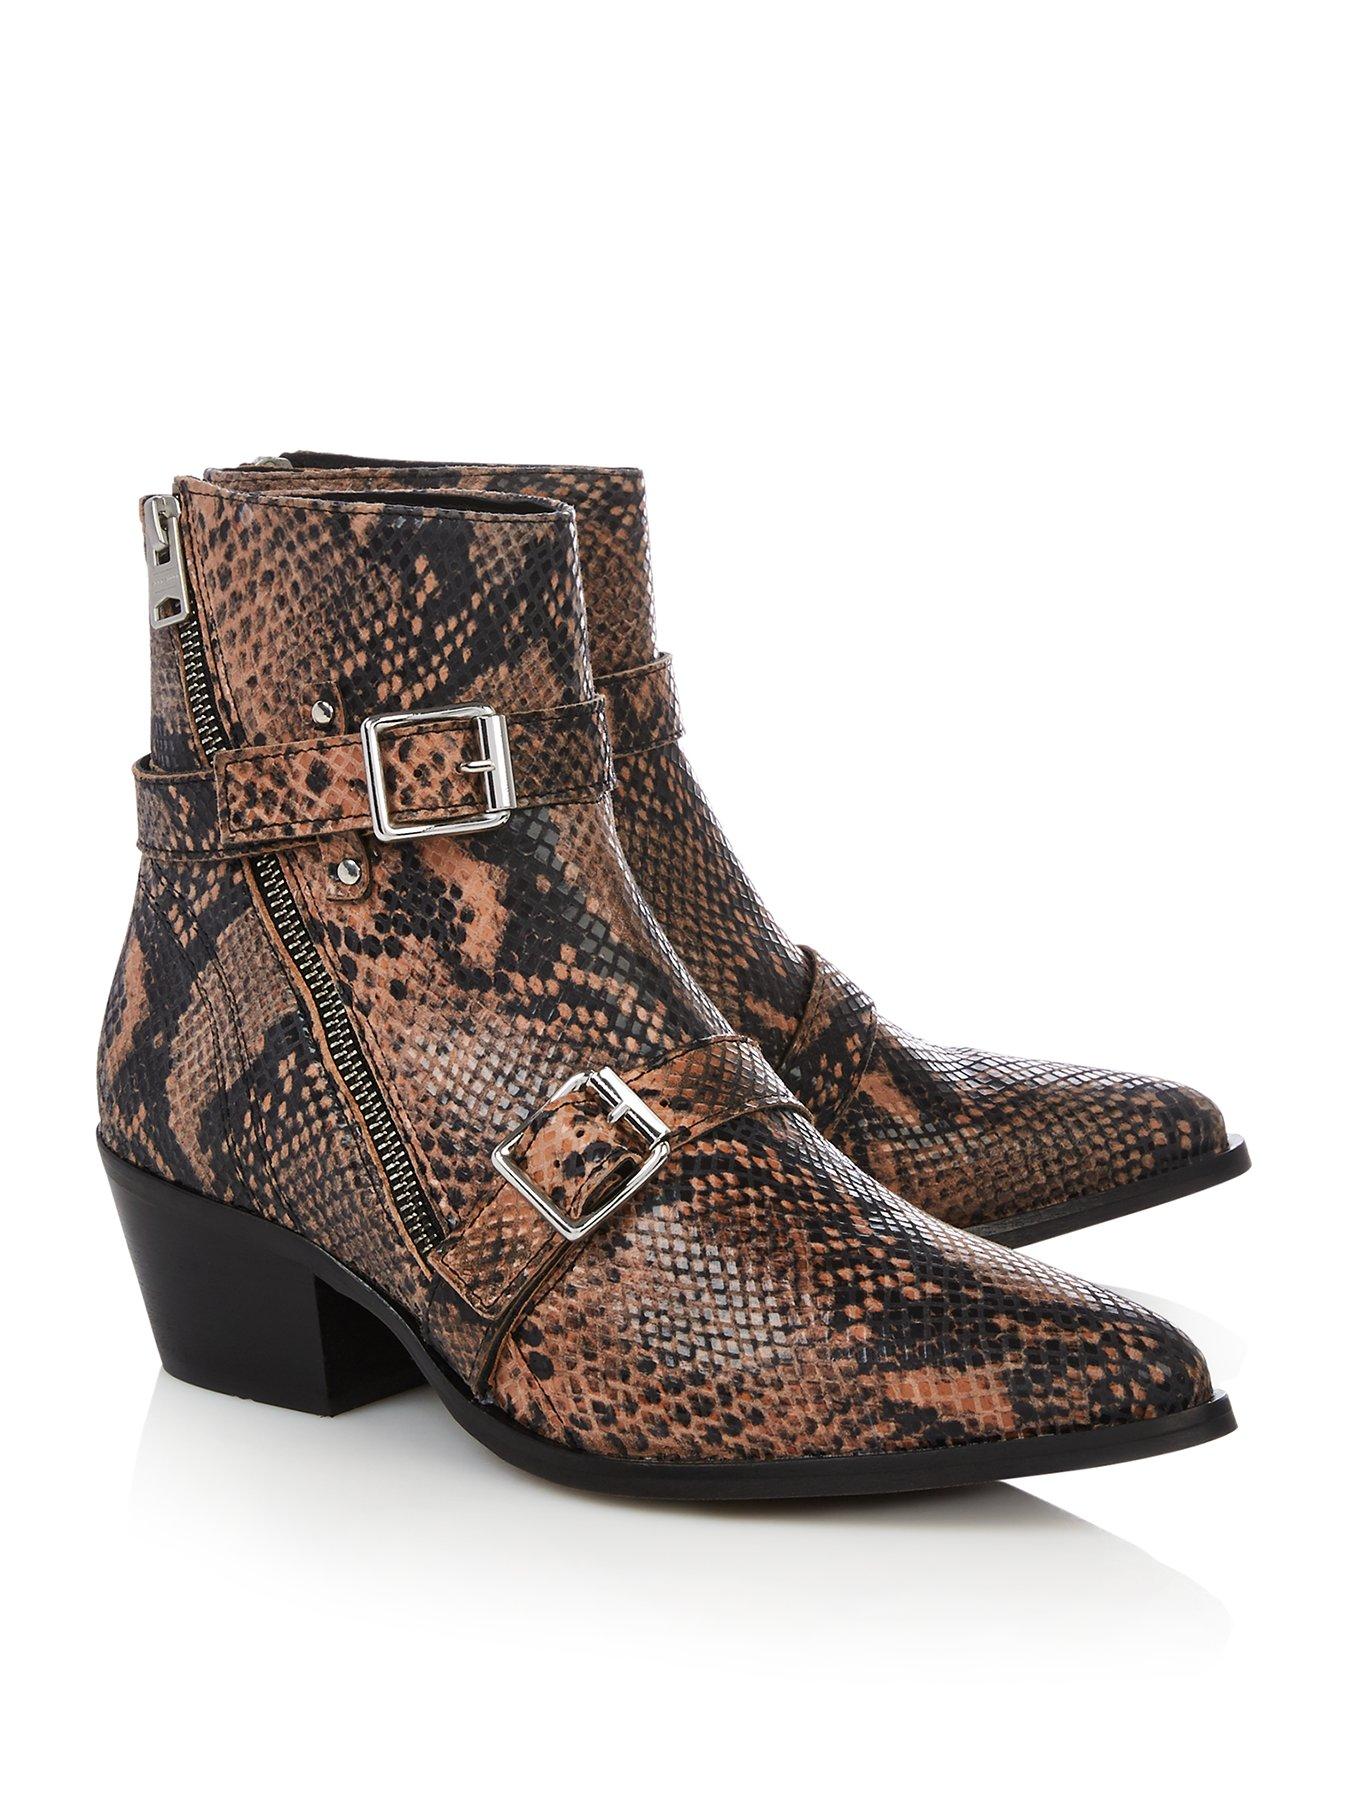 AllSaints Lior Double Buckle Ankle Boots - Taupe | very.co.uk